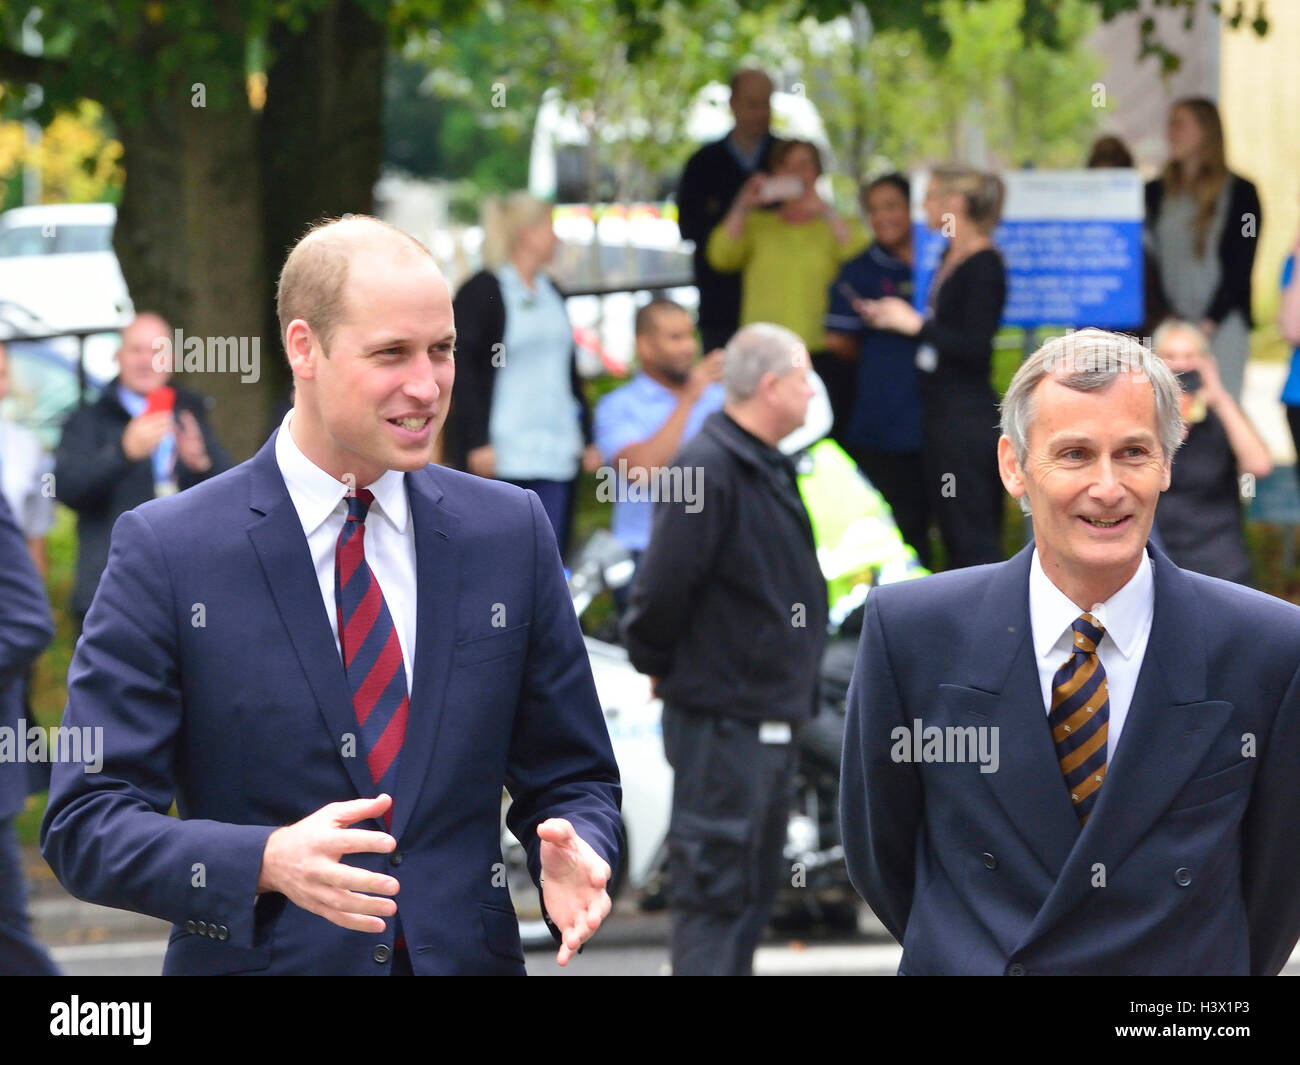 The Duke of Cambridge met by Lord Lieutenant of Hampshire on an official visit to a Step into Health programme at the Ark Conference Center Basingstoke and North Hampshire Hospital focusing on work to provide employment opportunities for military veterans. The Duke will gain further insight into the @StepIntoHealth programme and meet some of its current participants and graduates. Credit:  Gary Blake/Alamy Live News Stock Photo